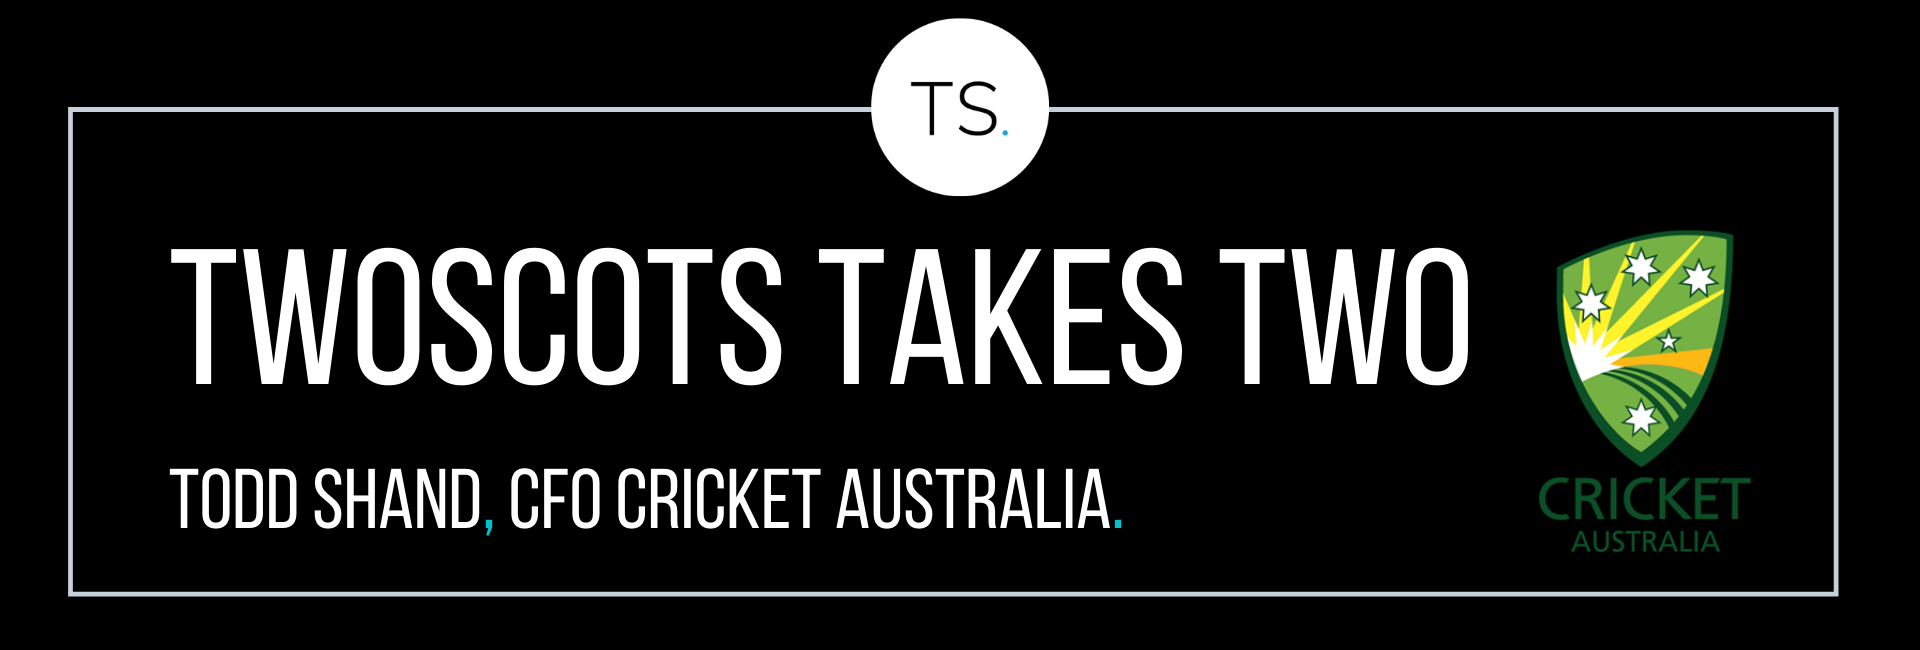 TwoScots Takes Two with Todd Shand, CFO of Cricket Australia